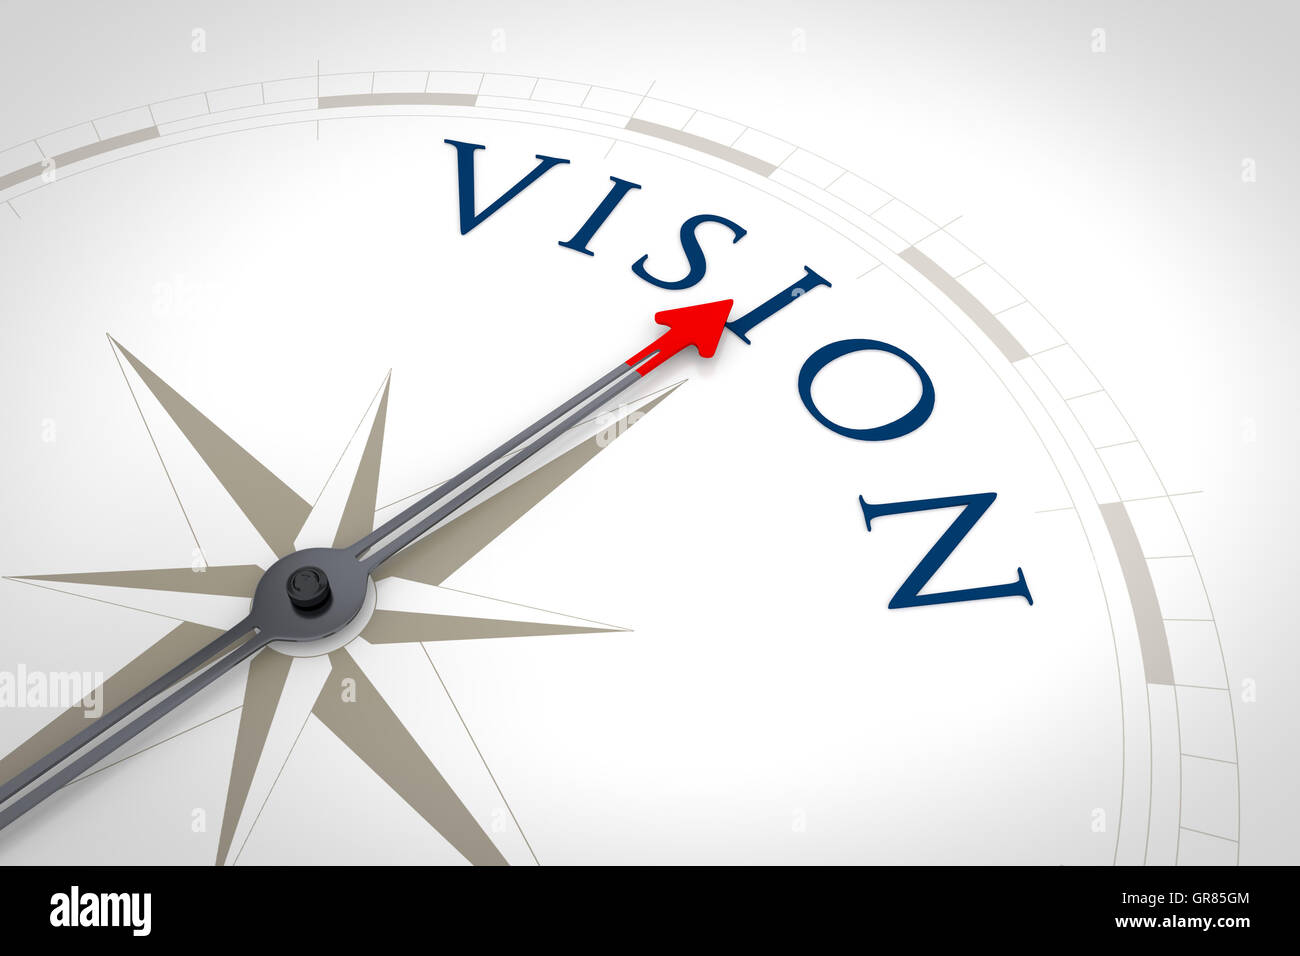 Compass Vision Stock Photo